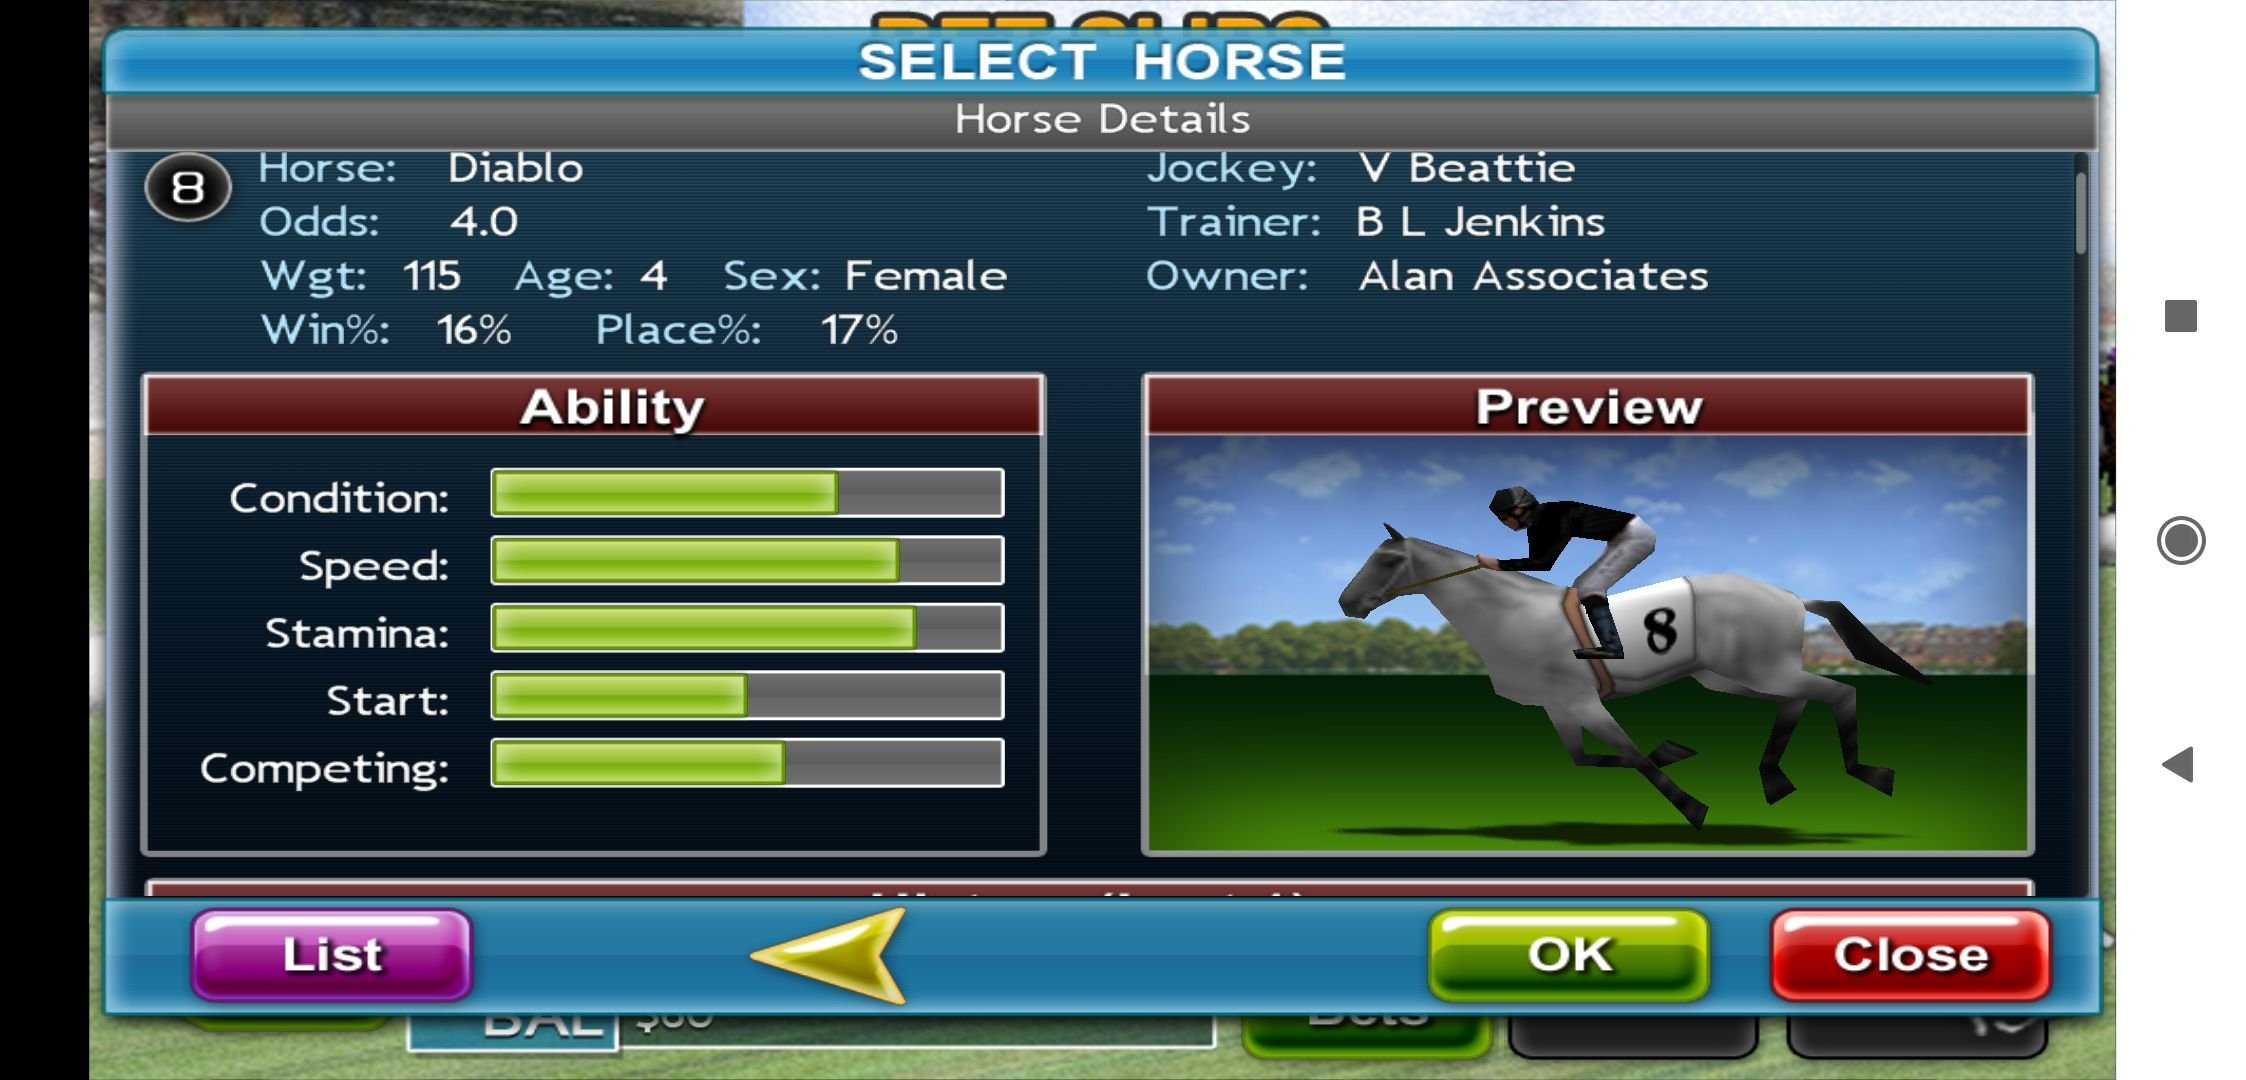 Play Free Virtual Horse Race Game Online